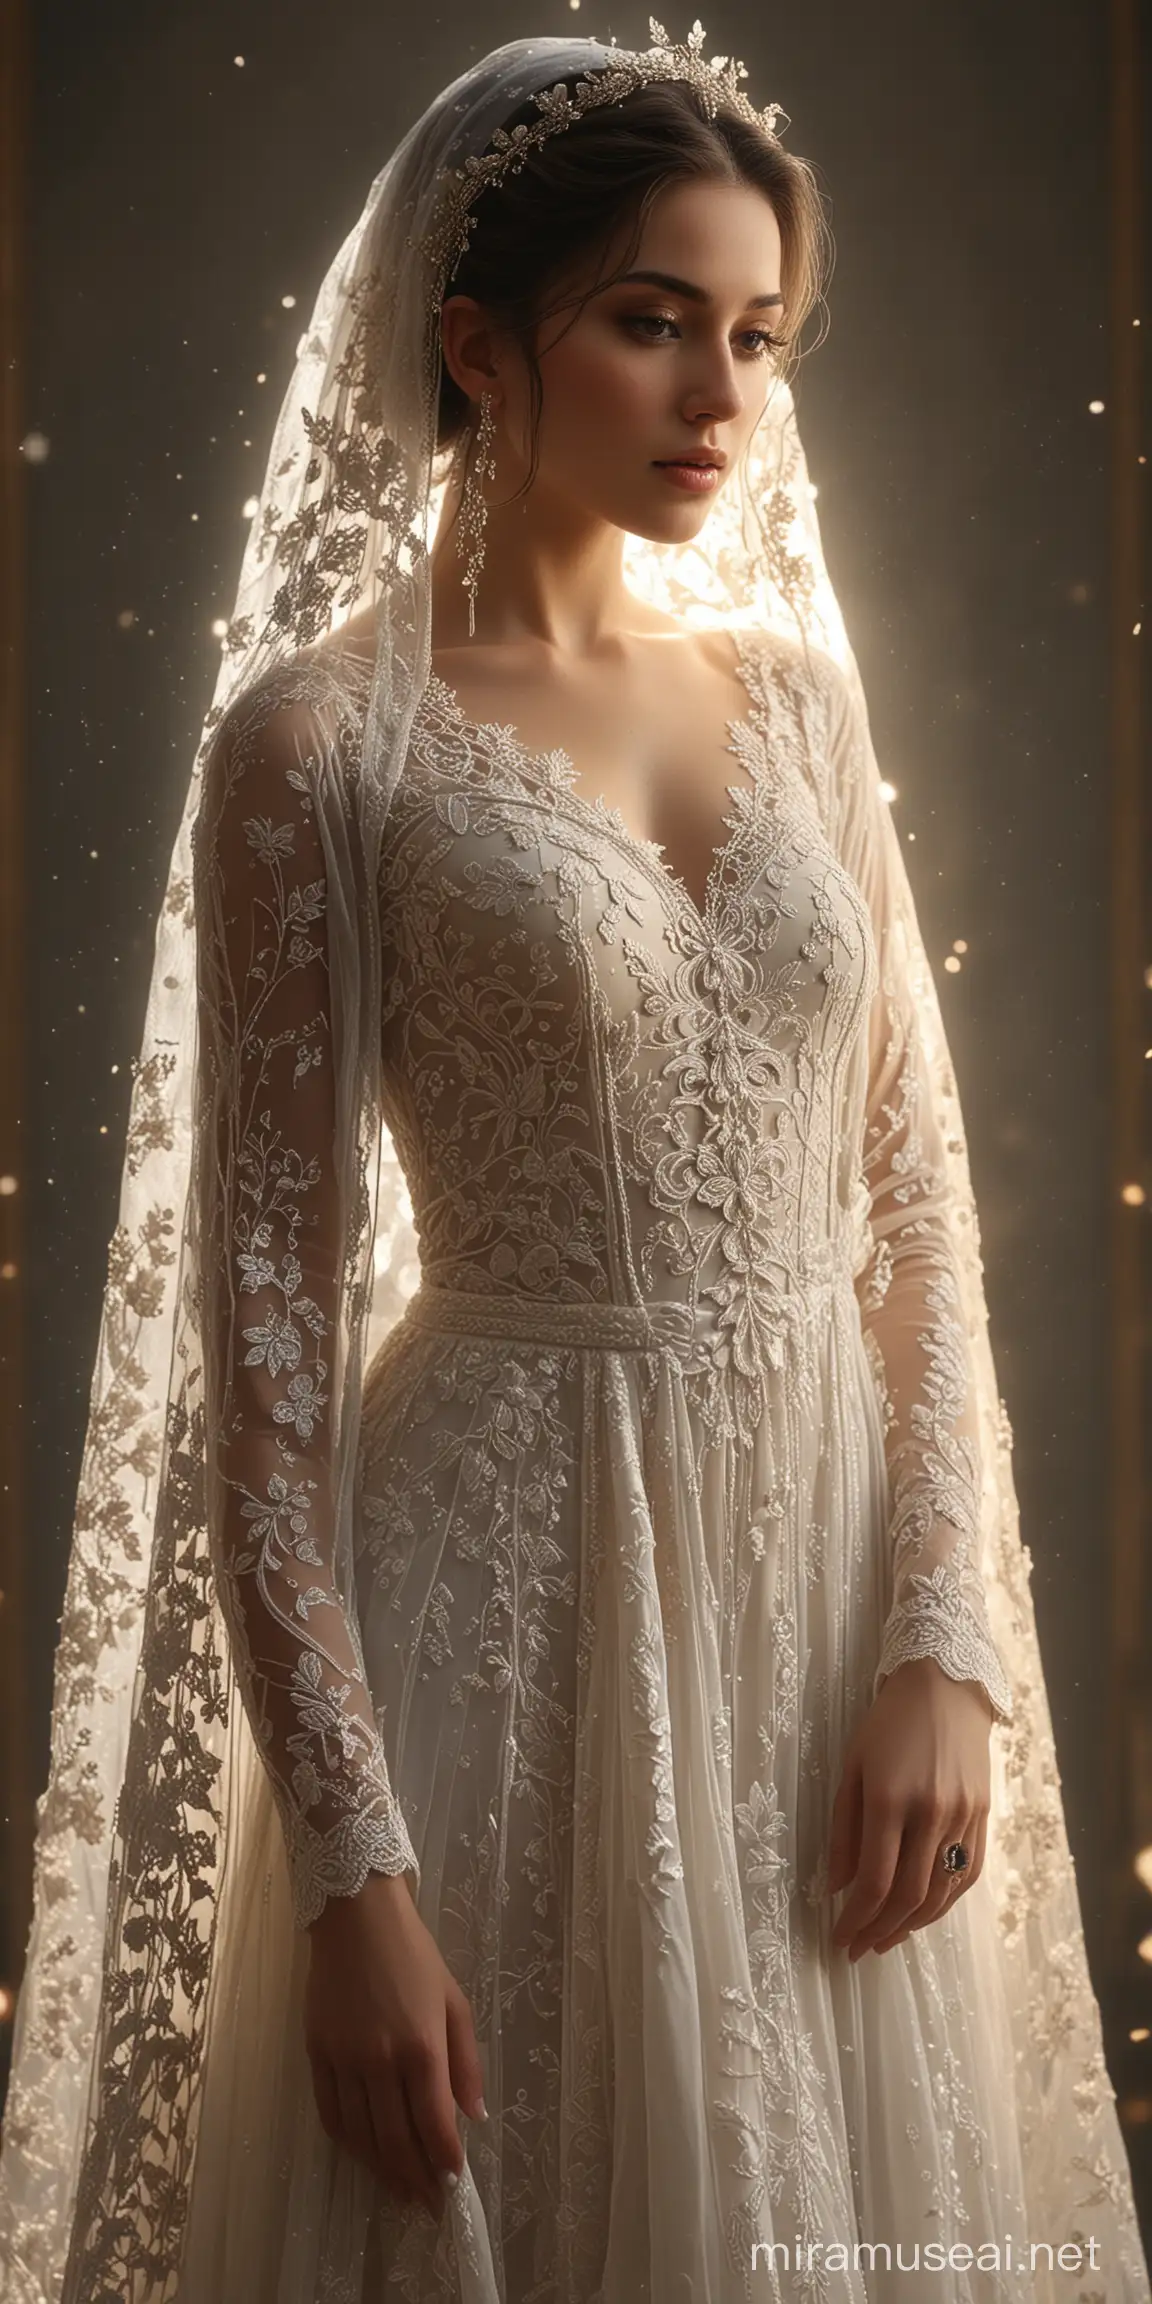 full body shot, A graceful woman with a veil and hair ornaments wearing a delicate angelic dress with intricate lace and delicate embroidery, surrounded by soft light. The artwork should have a cinematic feel with dramatic lighting and mystical settings. The artist's style was to be realistic and highly detailed, taking inspiration from the work of Victoria Frances and Nene Thomas. Resolution must be 4K or higher, by Artgerm, 4k, natural light, white head crown with full ornaments, perfection, very high resolution, hijab wedding, fireflies, fireflies